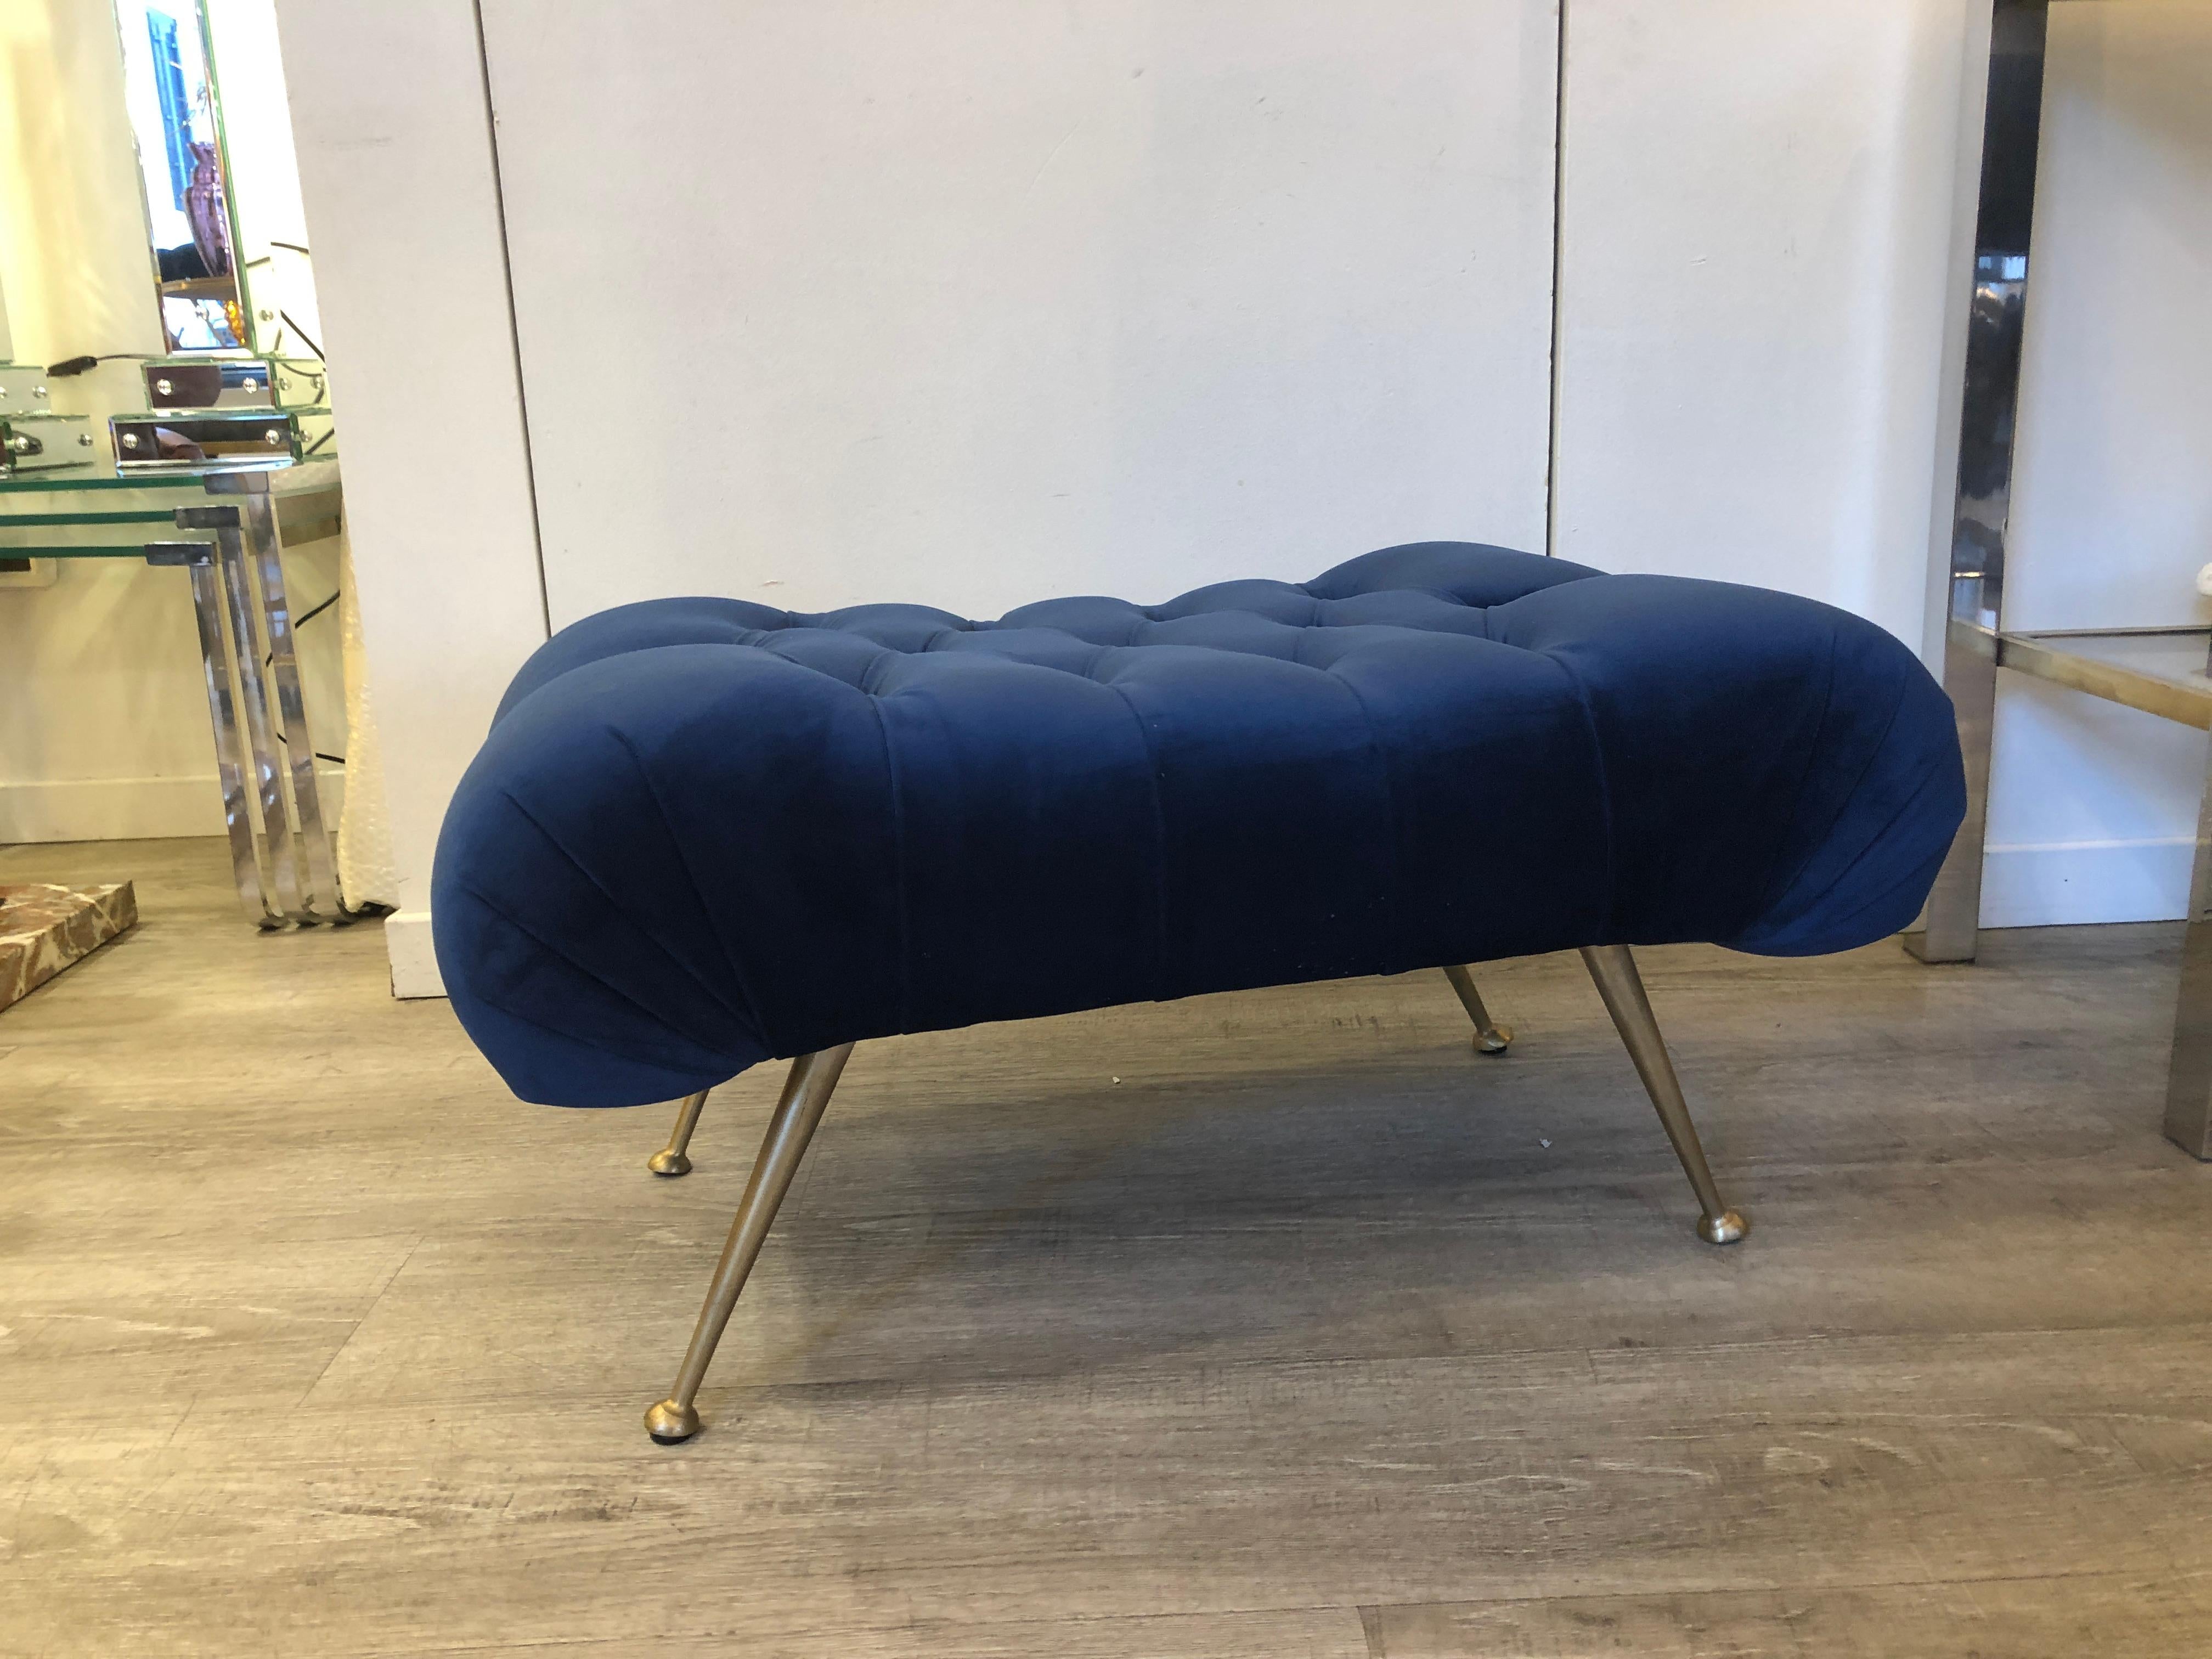 Mid-century Italian blue velvet brass legs footstools
Quantity Available : 2
These ottomans have been reupholstered by hand with blue velvet and re-padded according to the original shape .
Brass Legs are original.
Size of each stool: W 70 cm , D 45